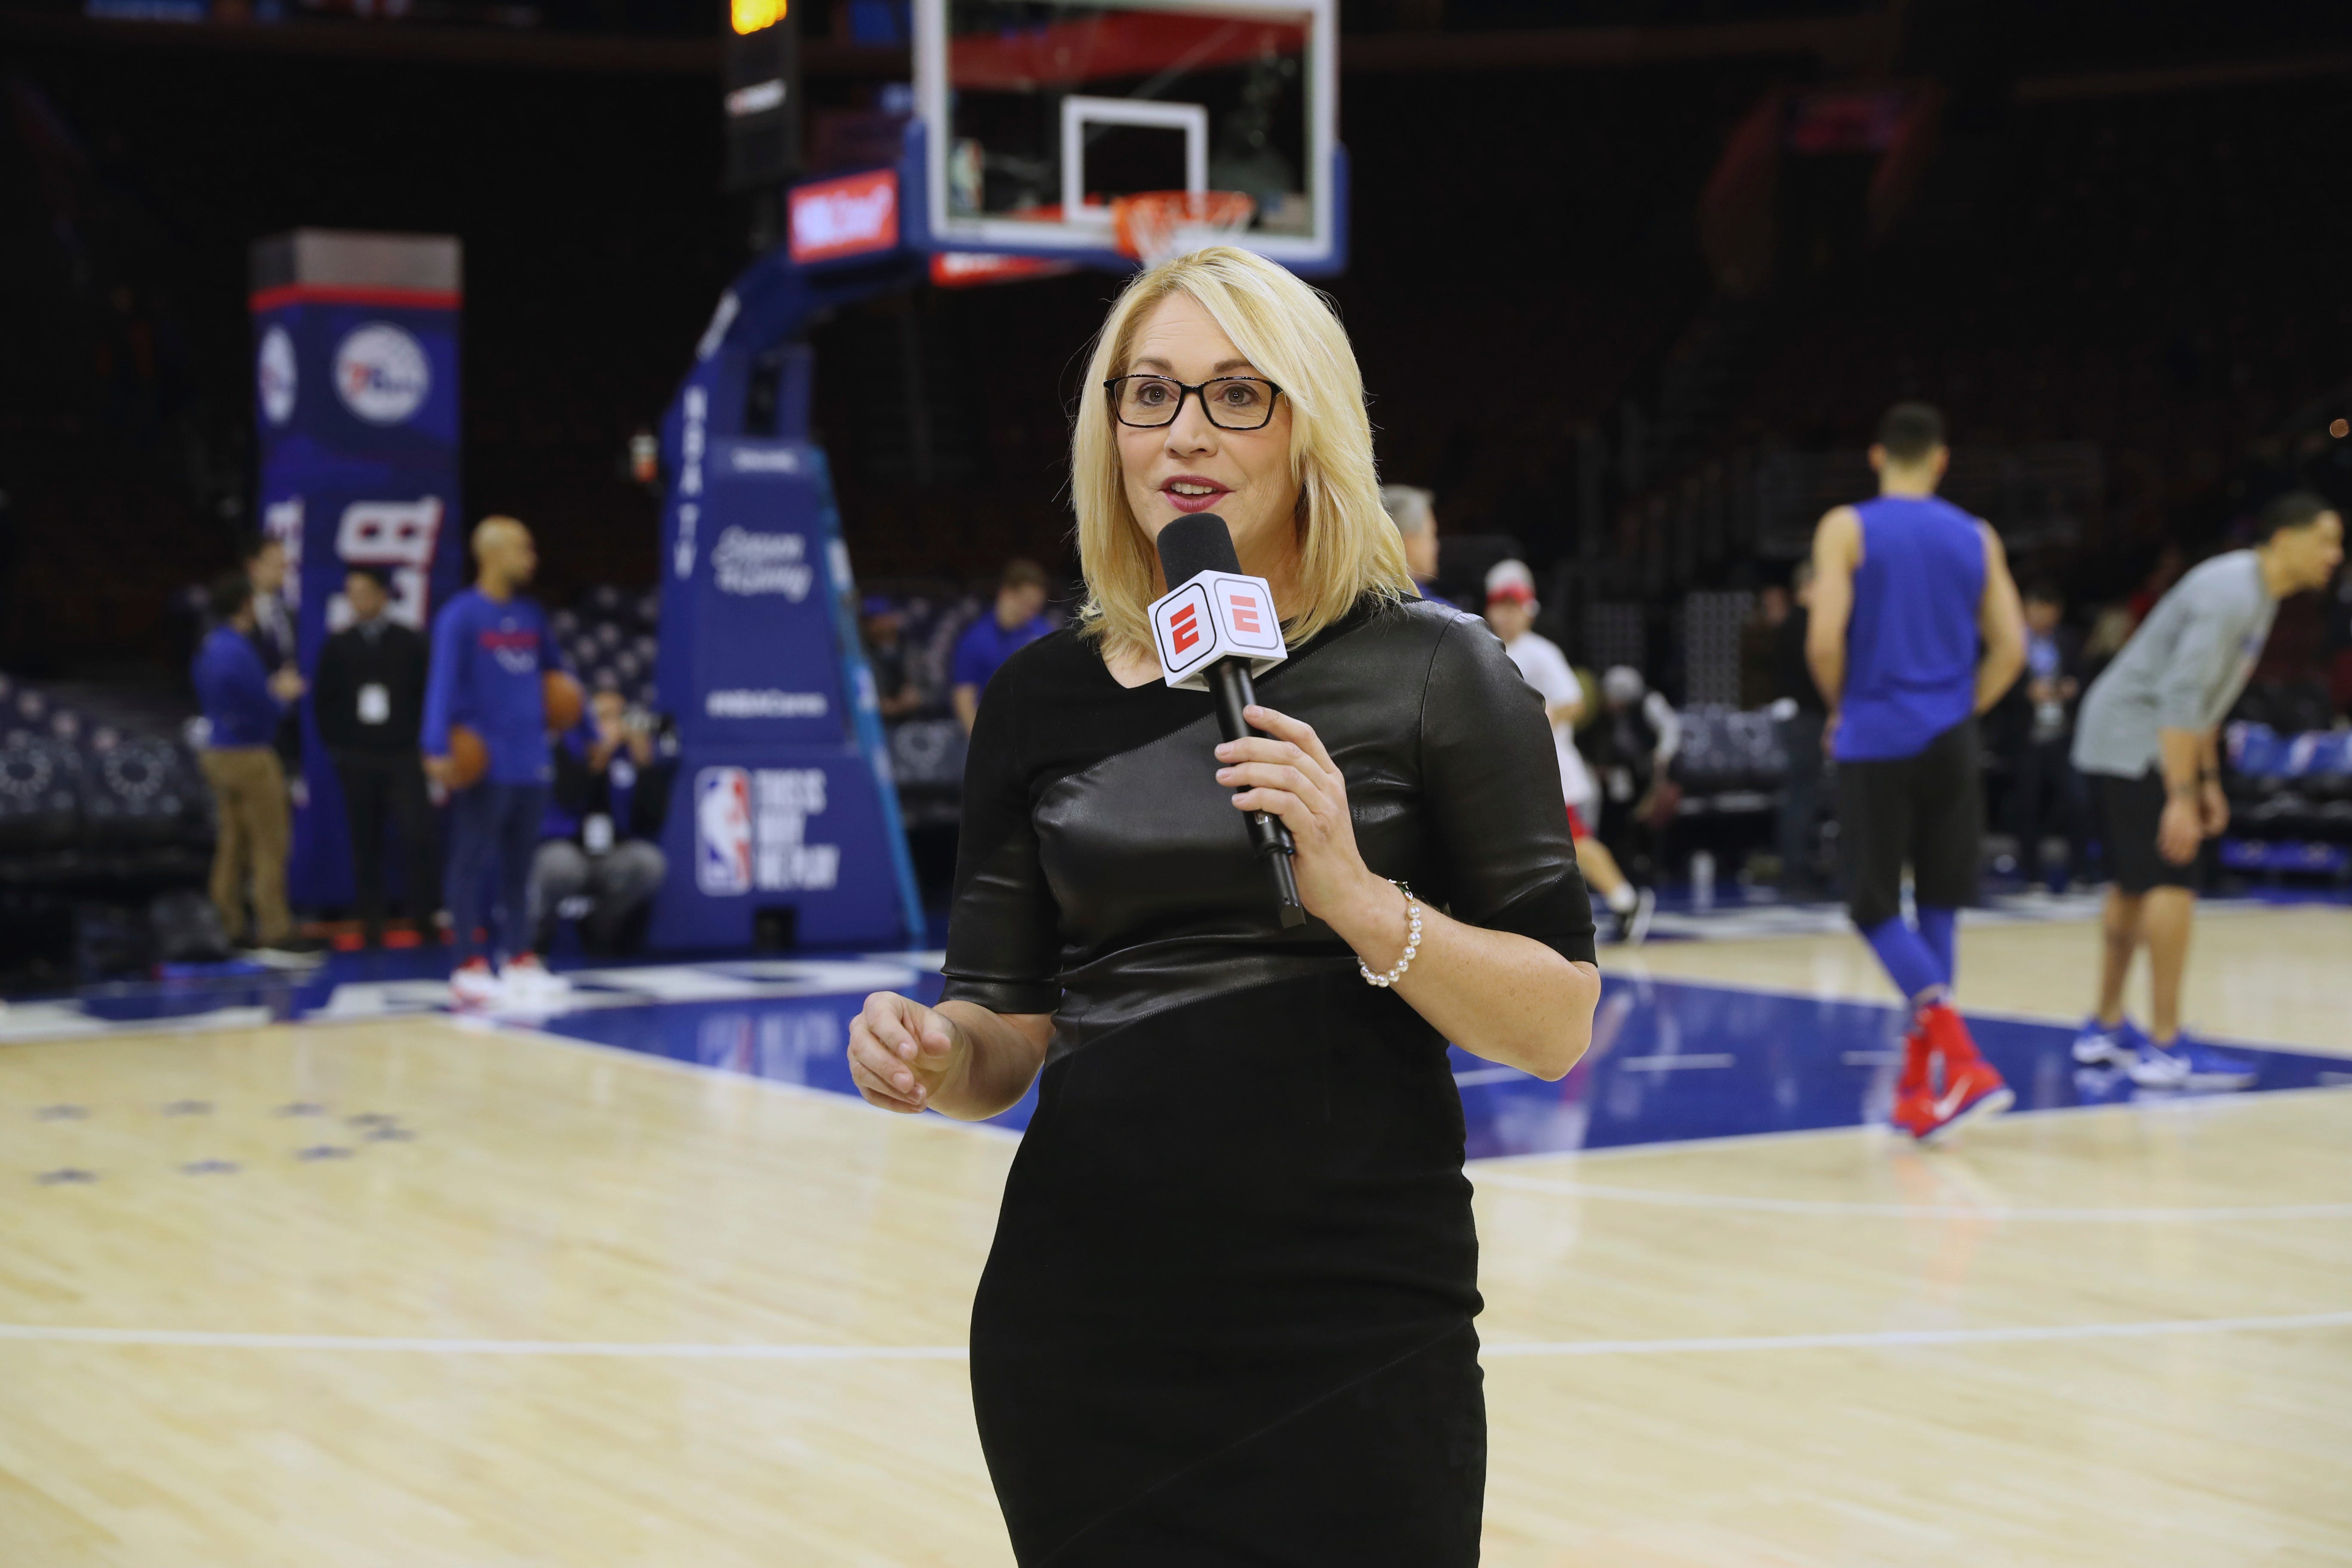 Opinion: By doing her job, and doing it well, NBA broadcaster Doris Burke is Changing the Game